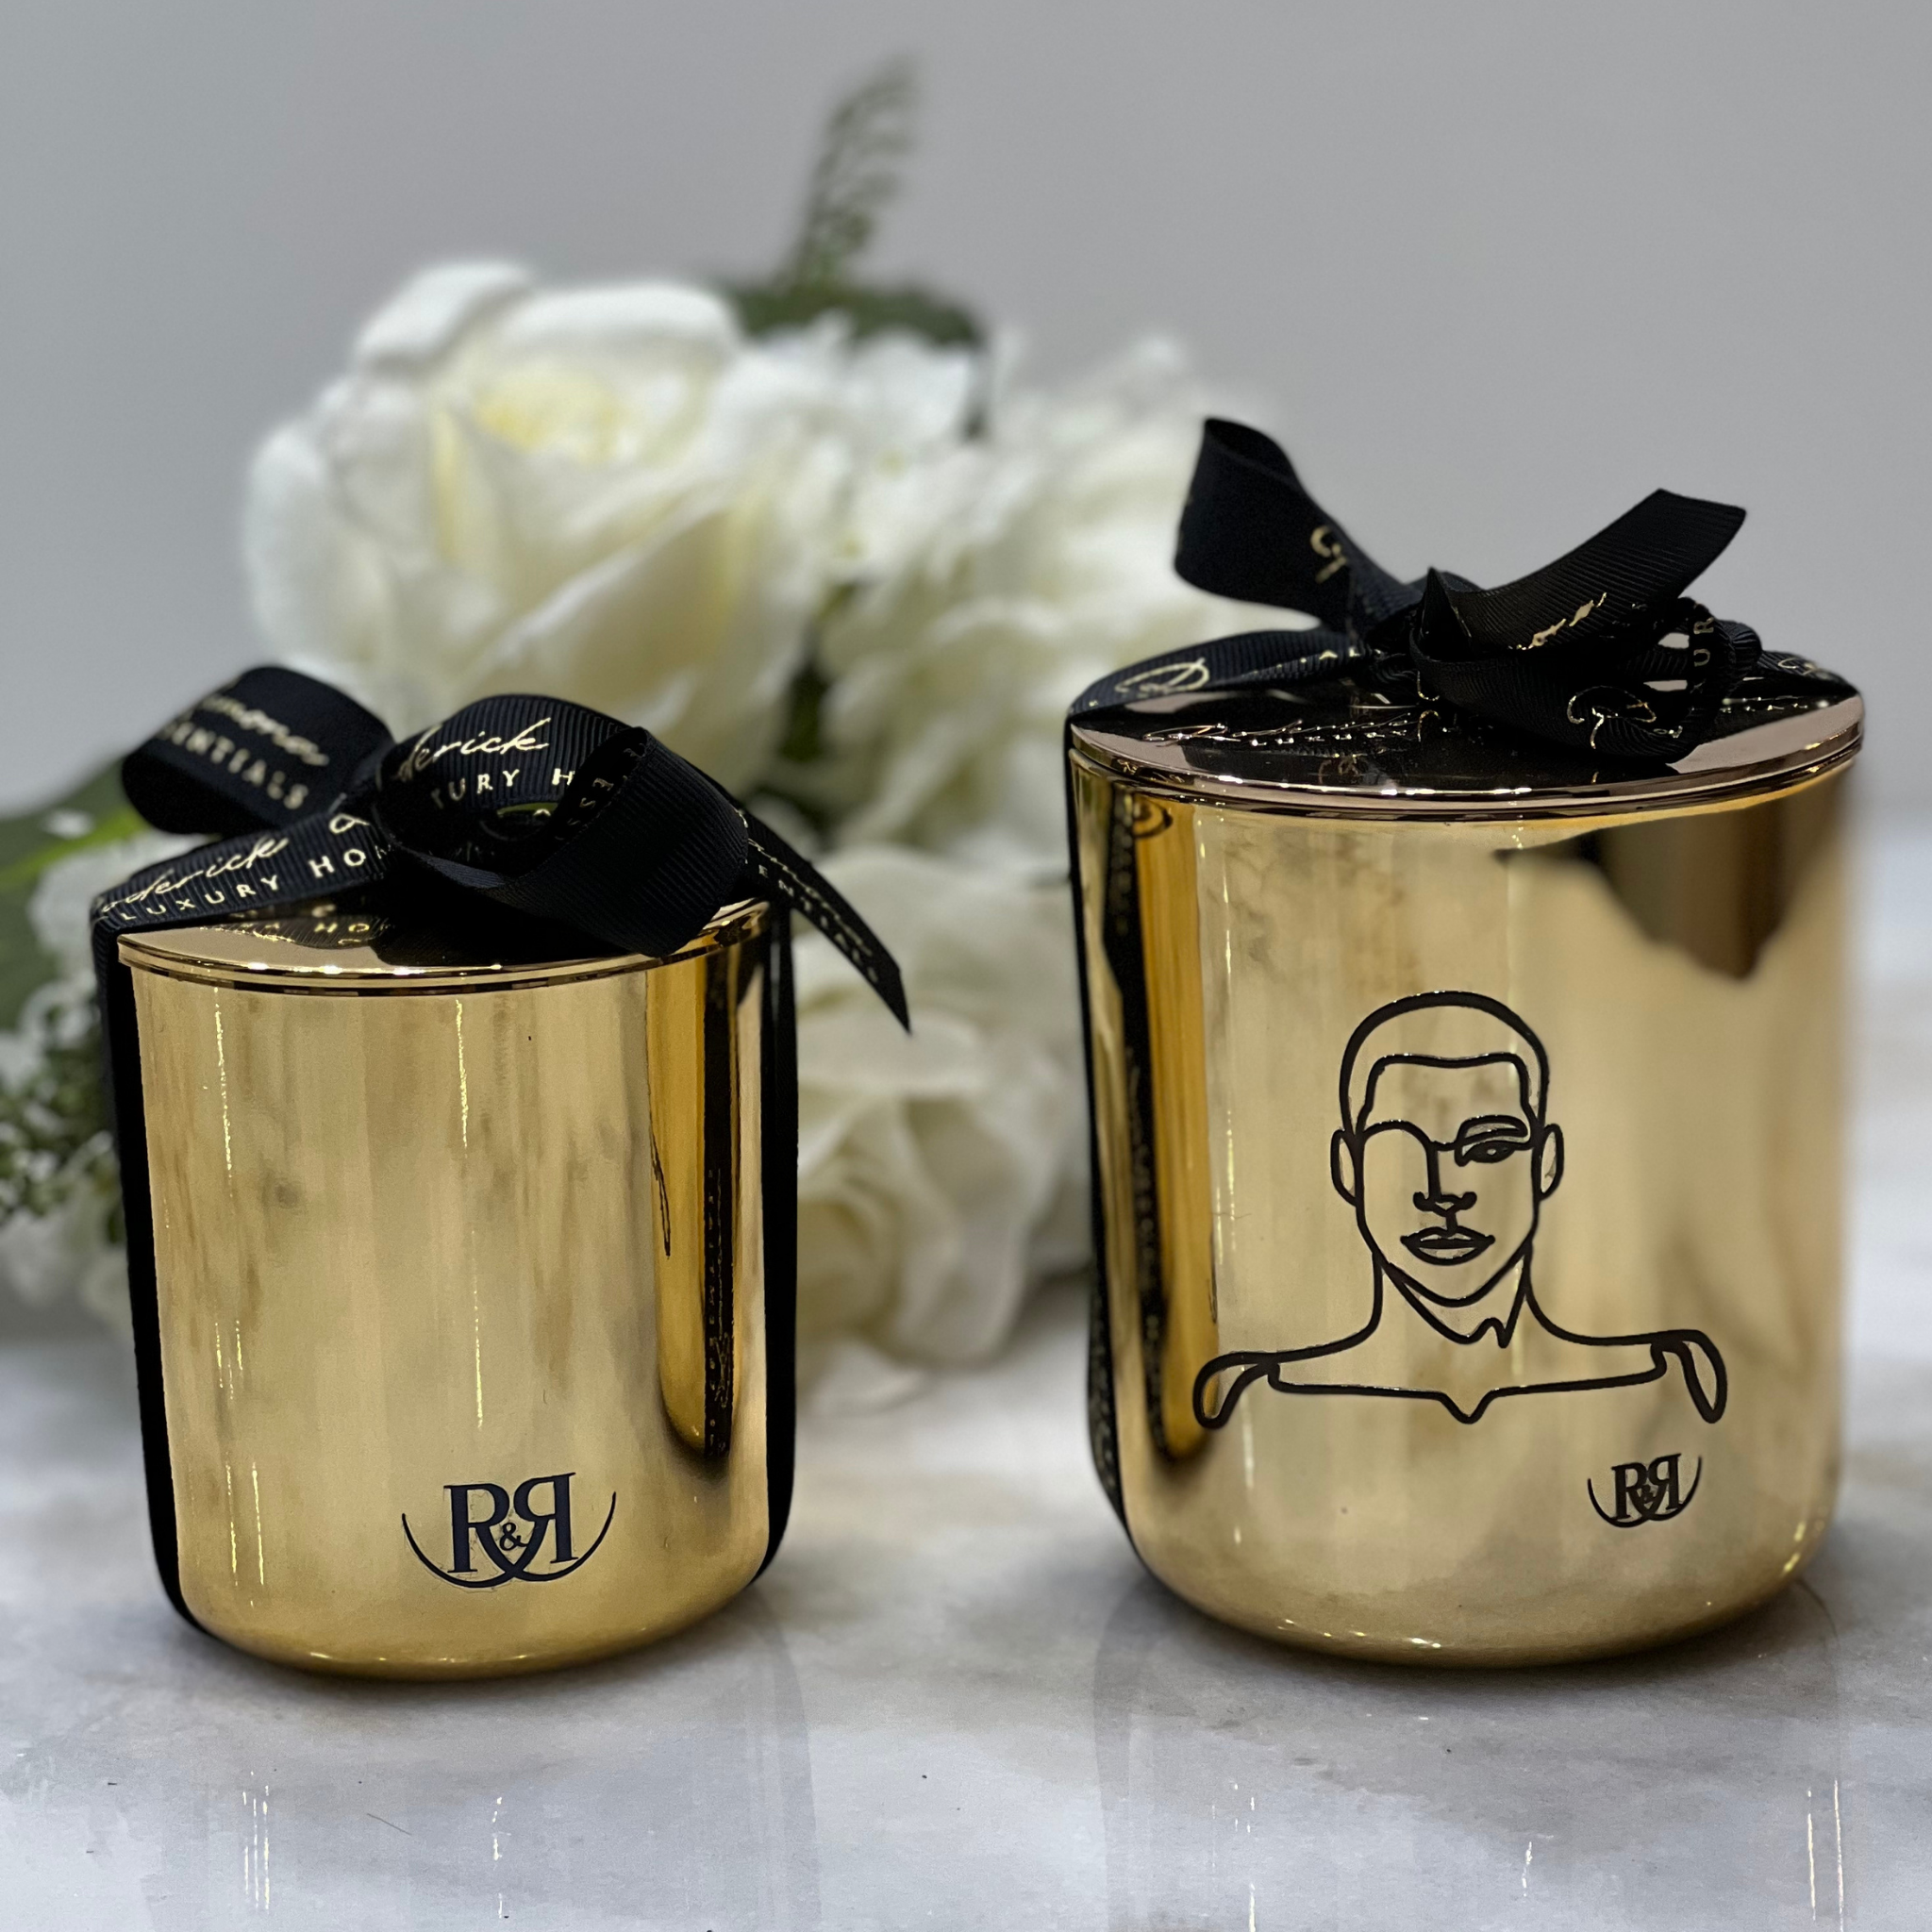 Luxury Gifts for Him - Verbal Gold Blog